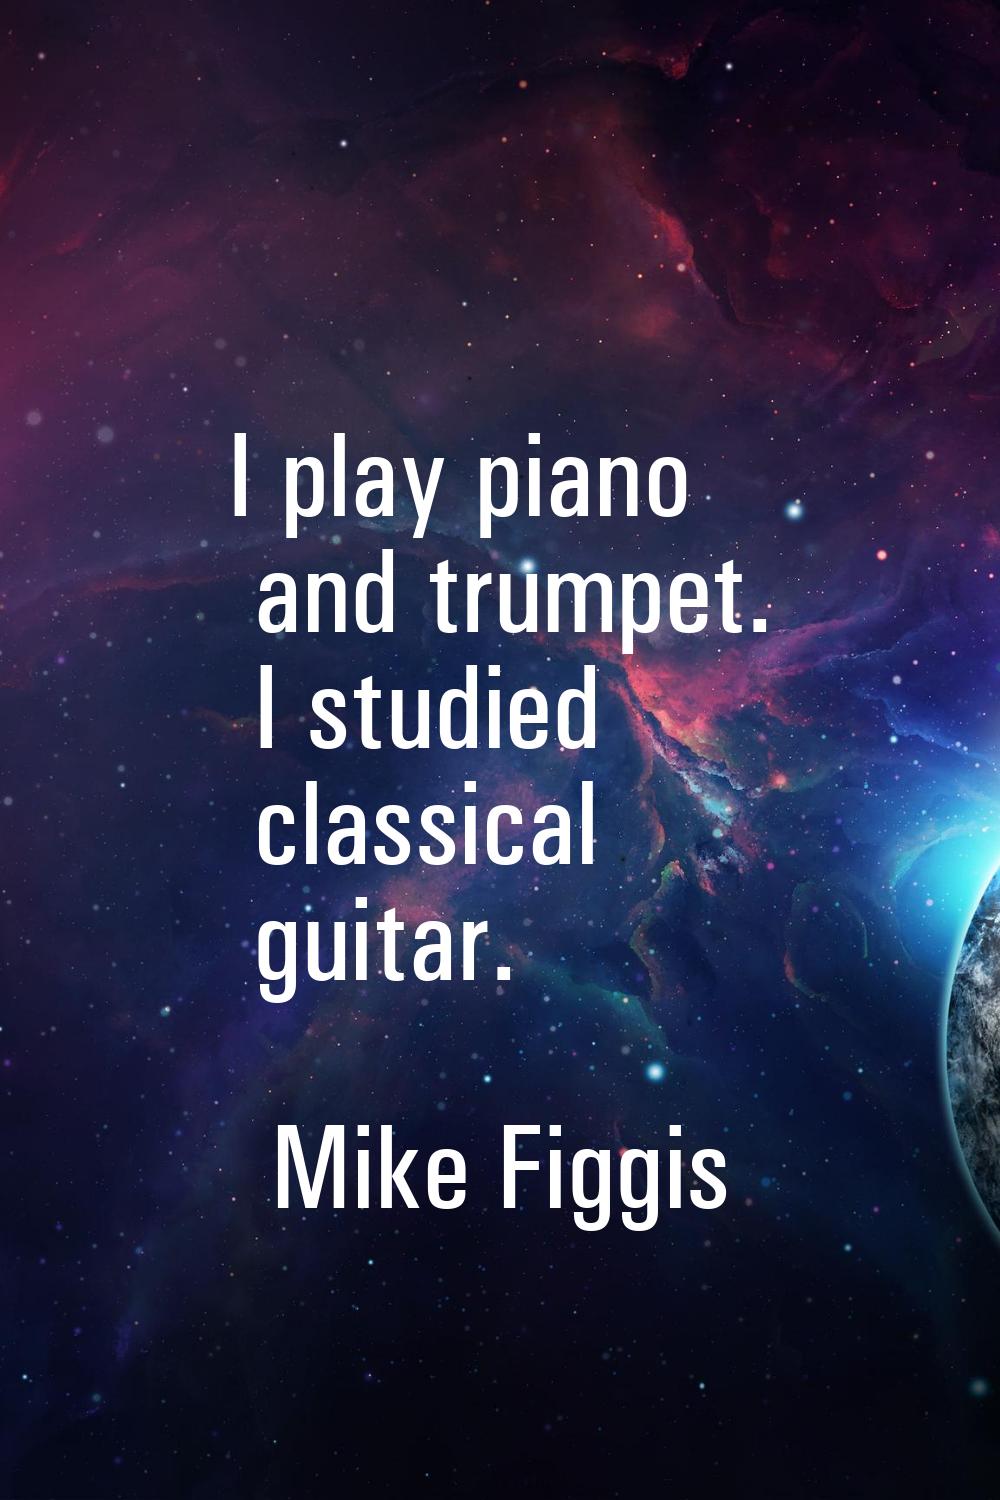 I play piano and trumpet. I studied classical guitar.